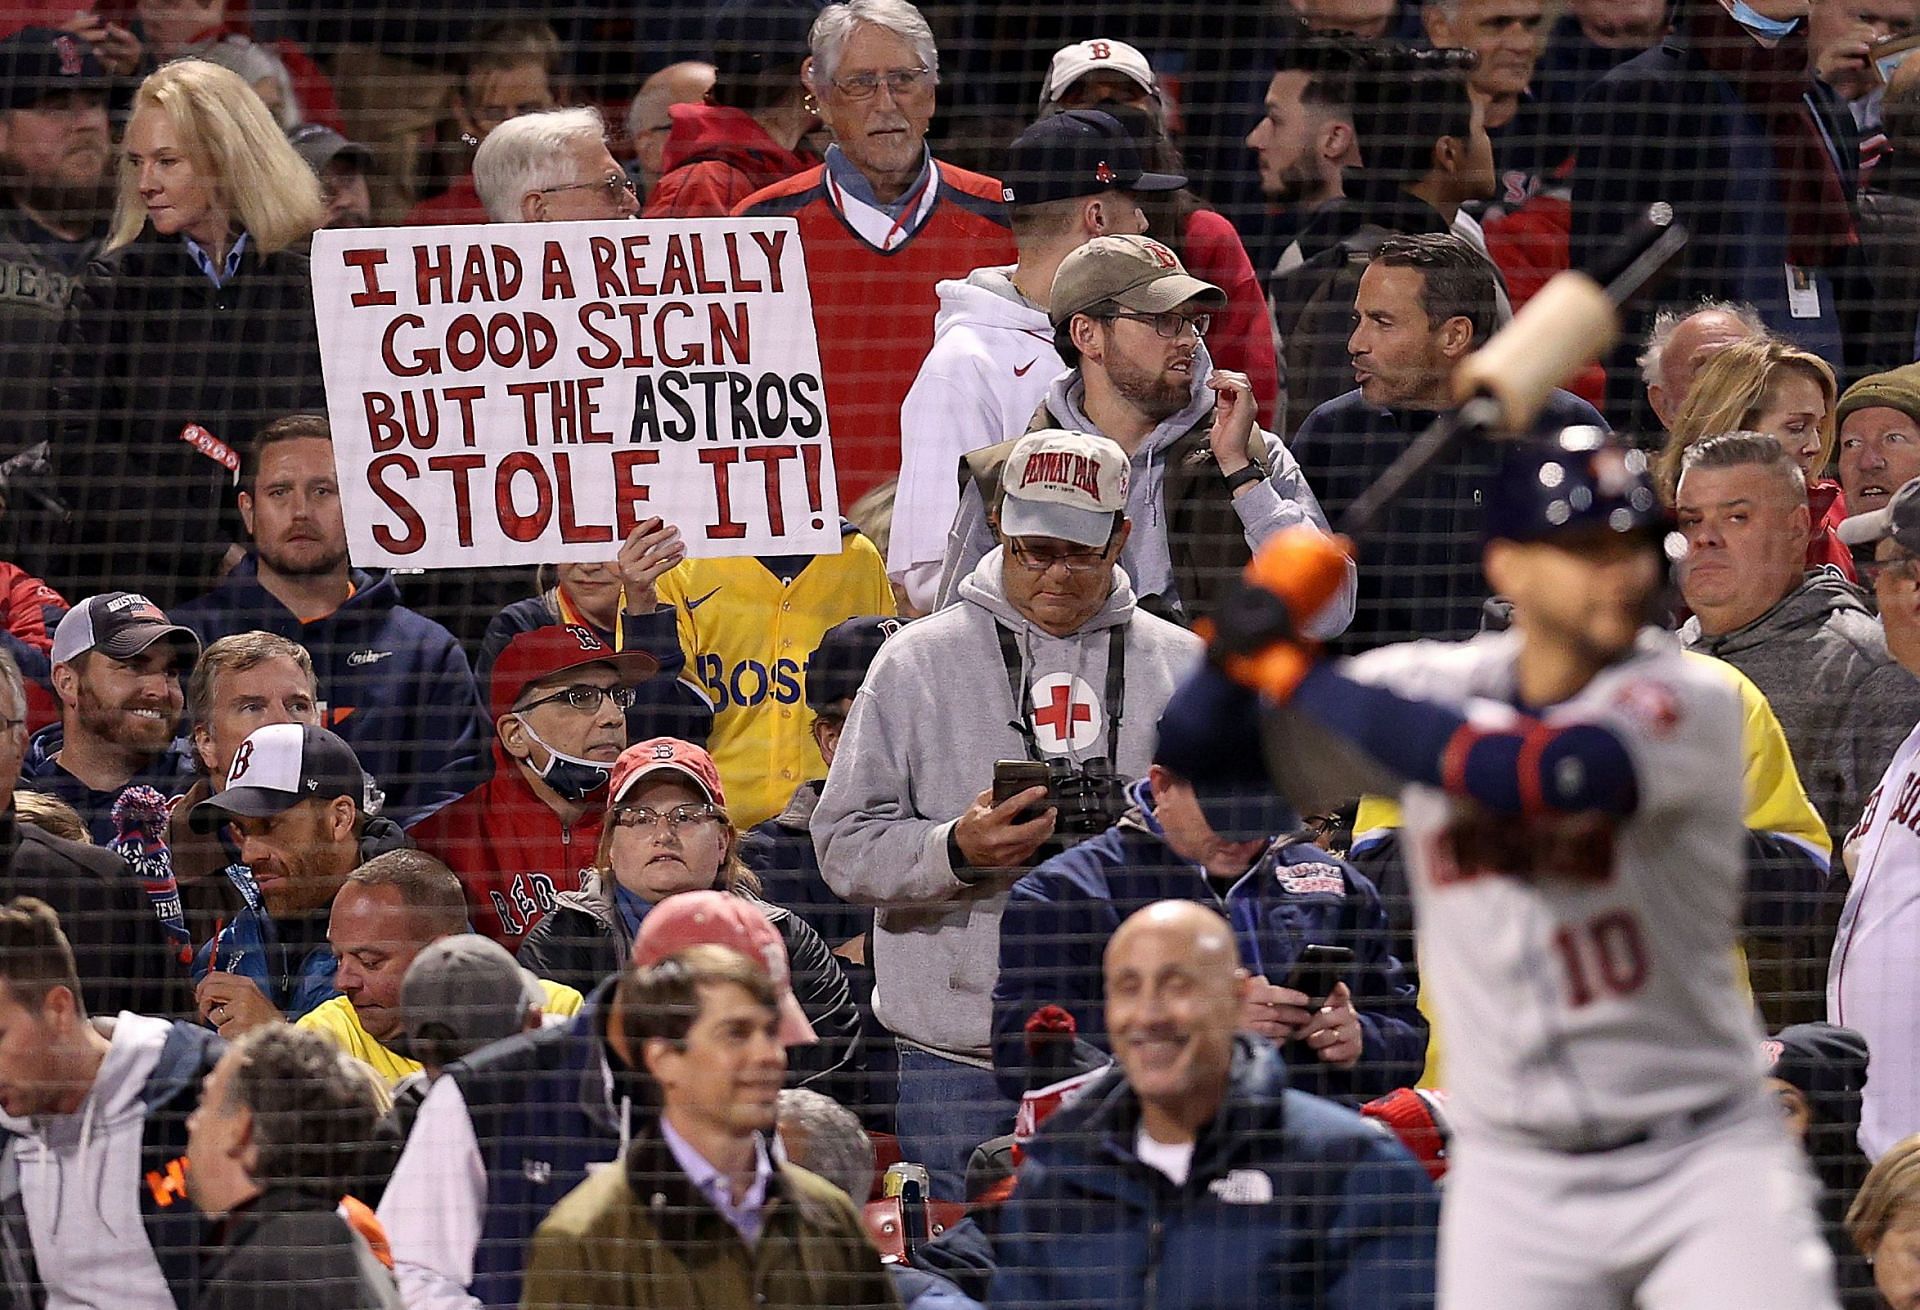 A sign referring to the Houston Astros cheating is held by a fan at Fenway Park